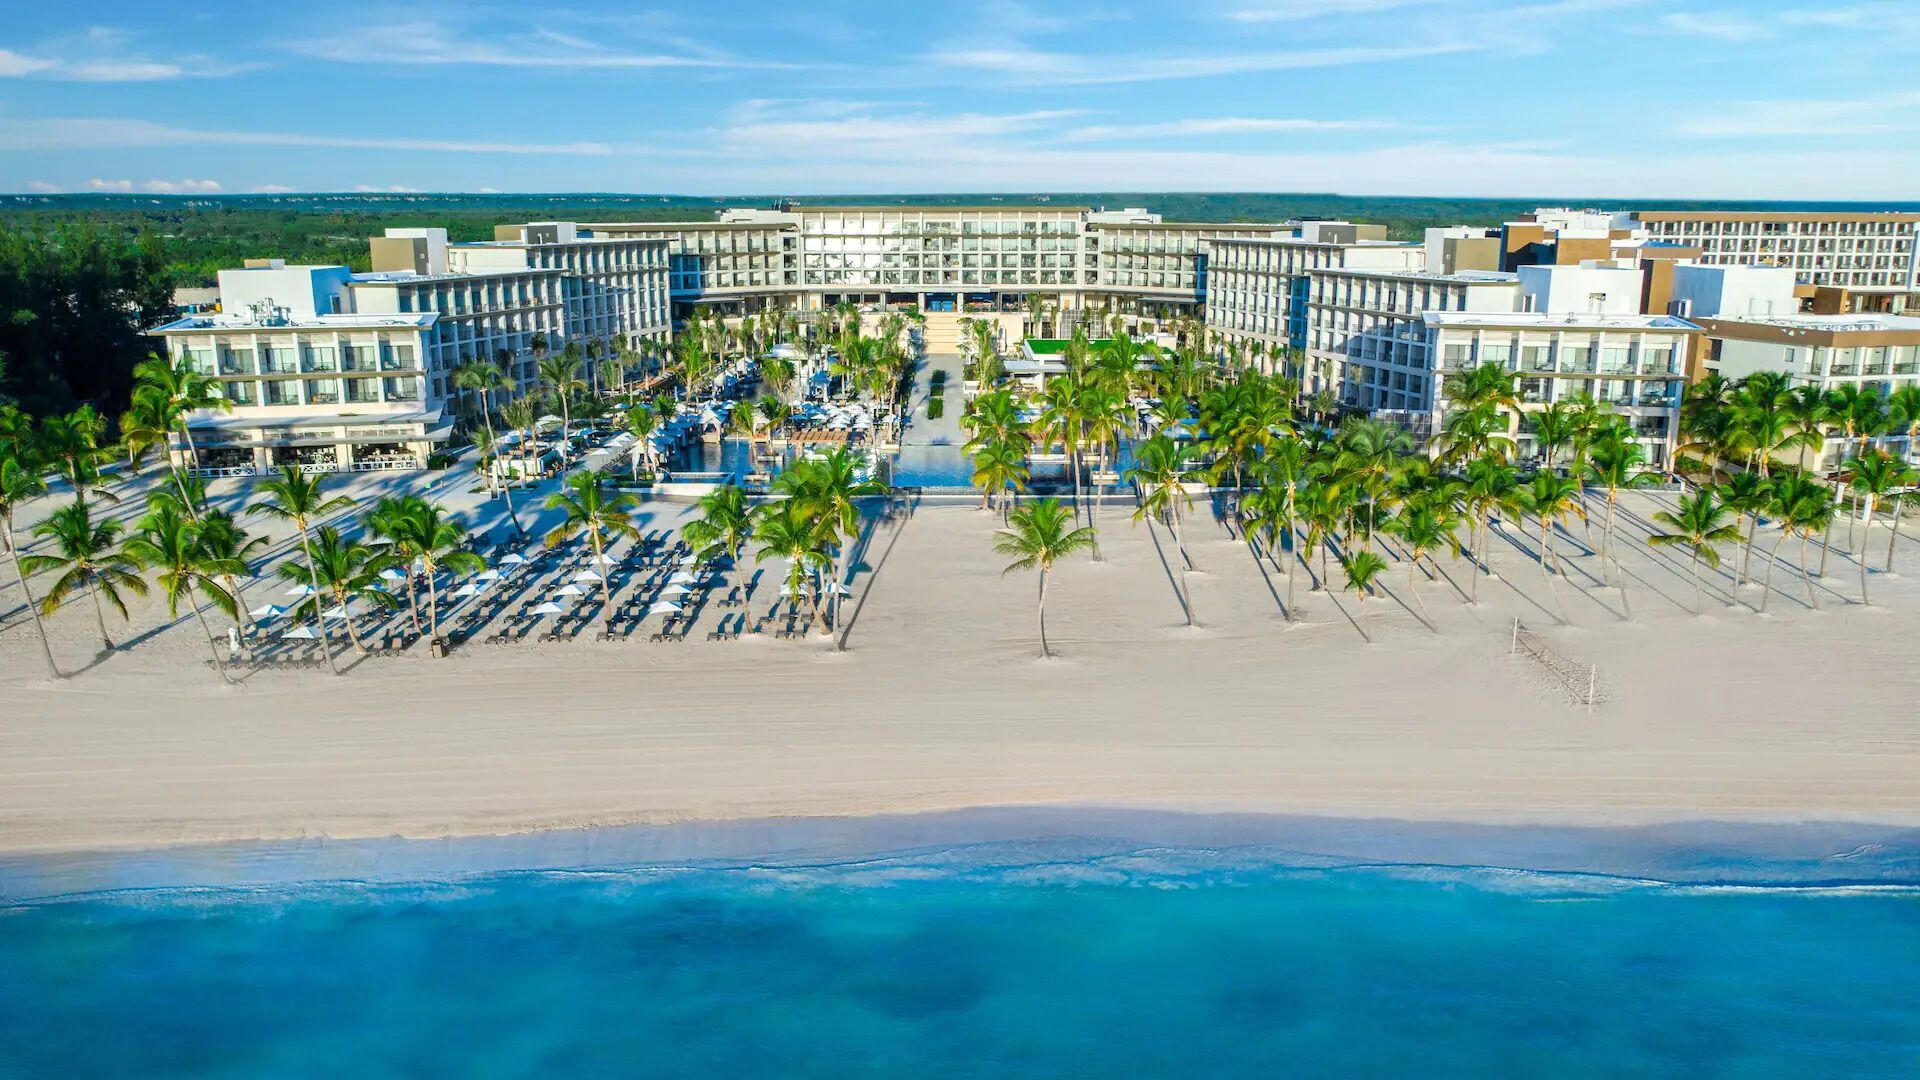 The best Hyatt all-inclusive resorts around the world. Find your luxury retreat for family and couples vacations